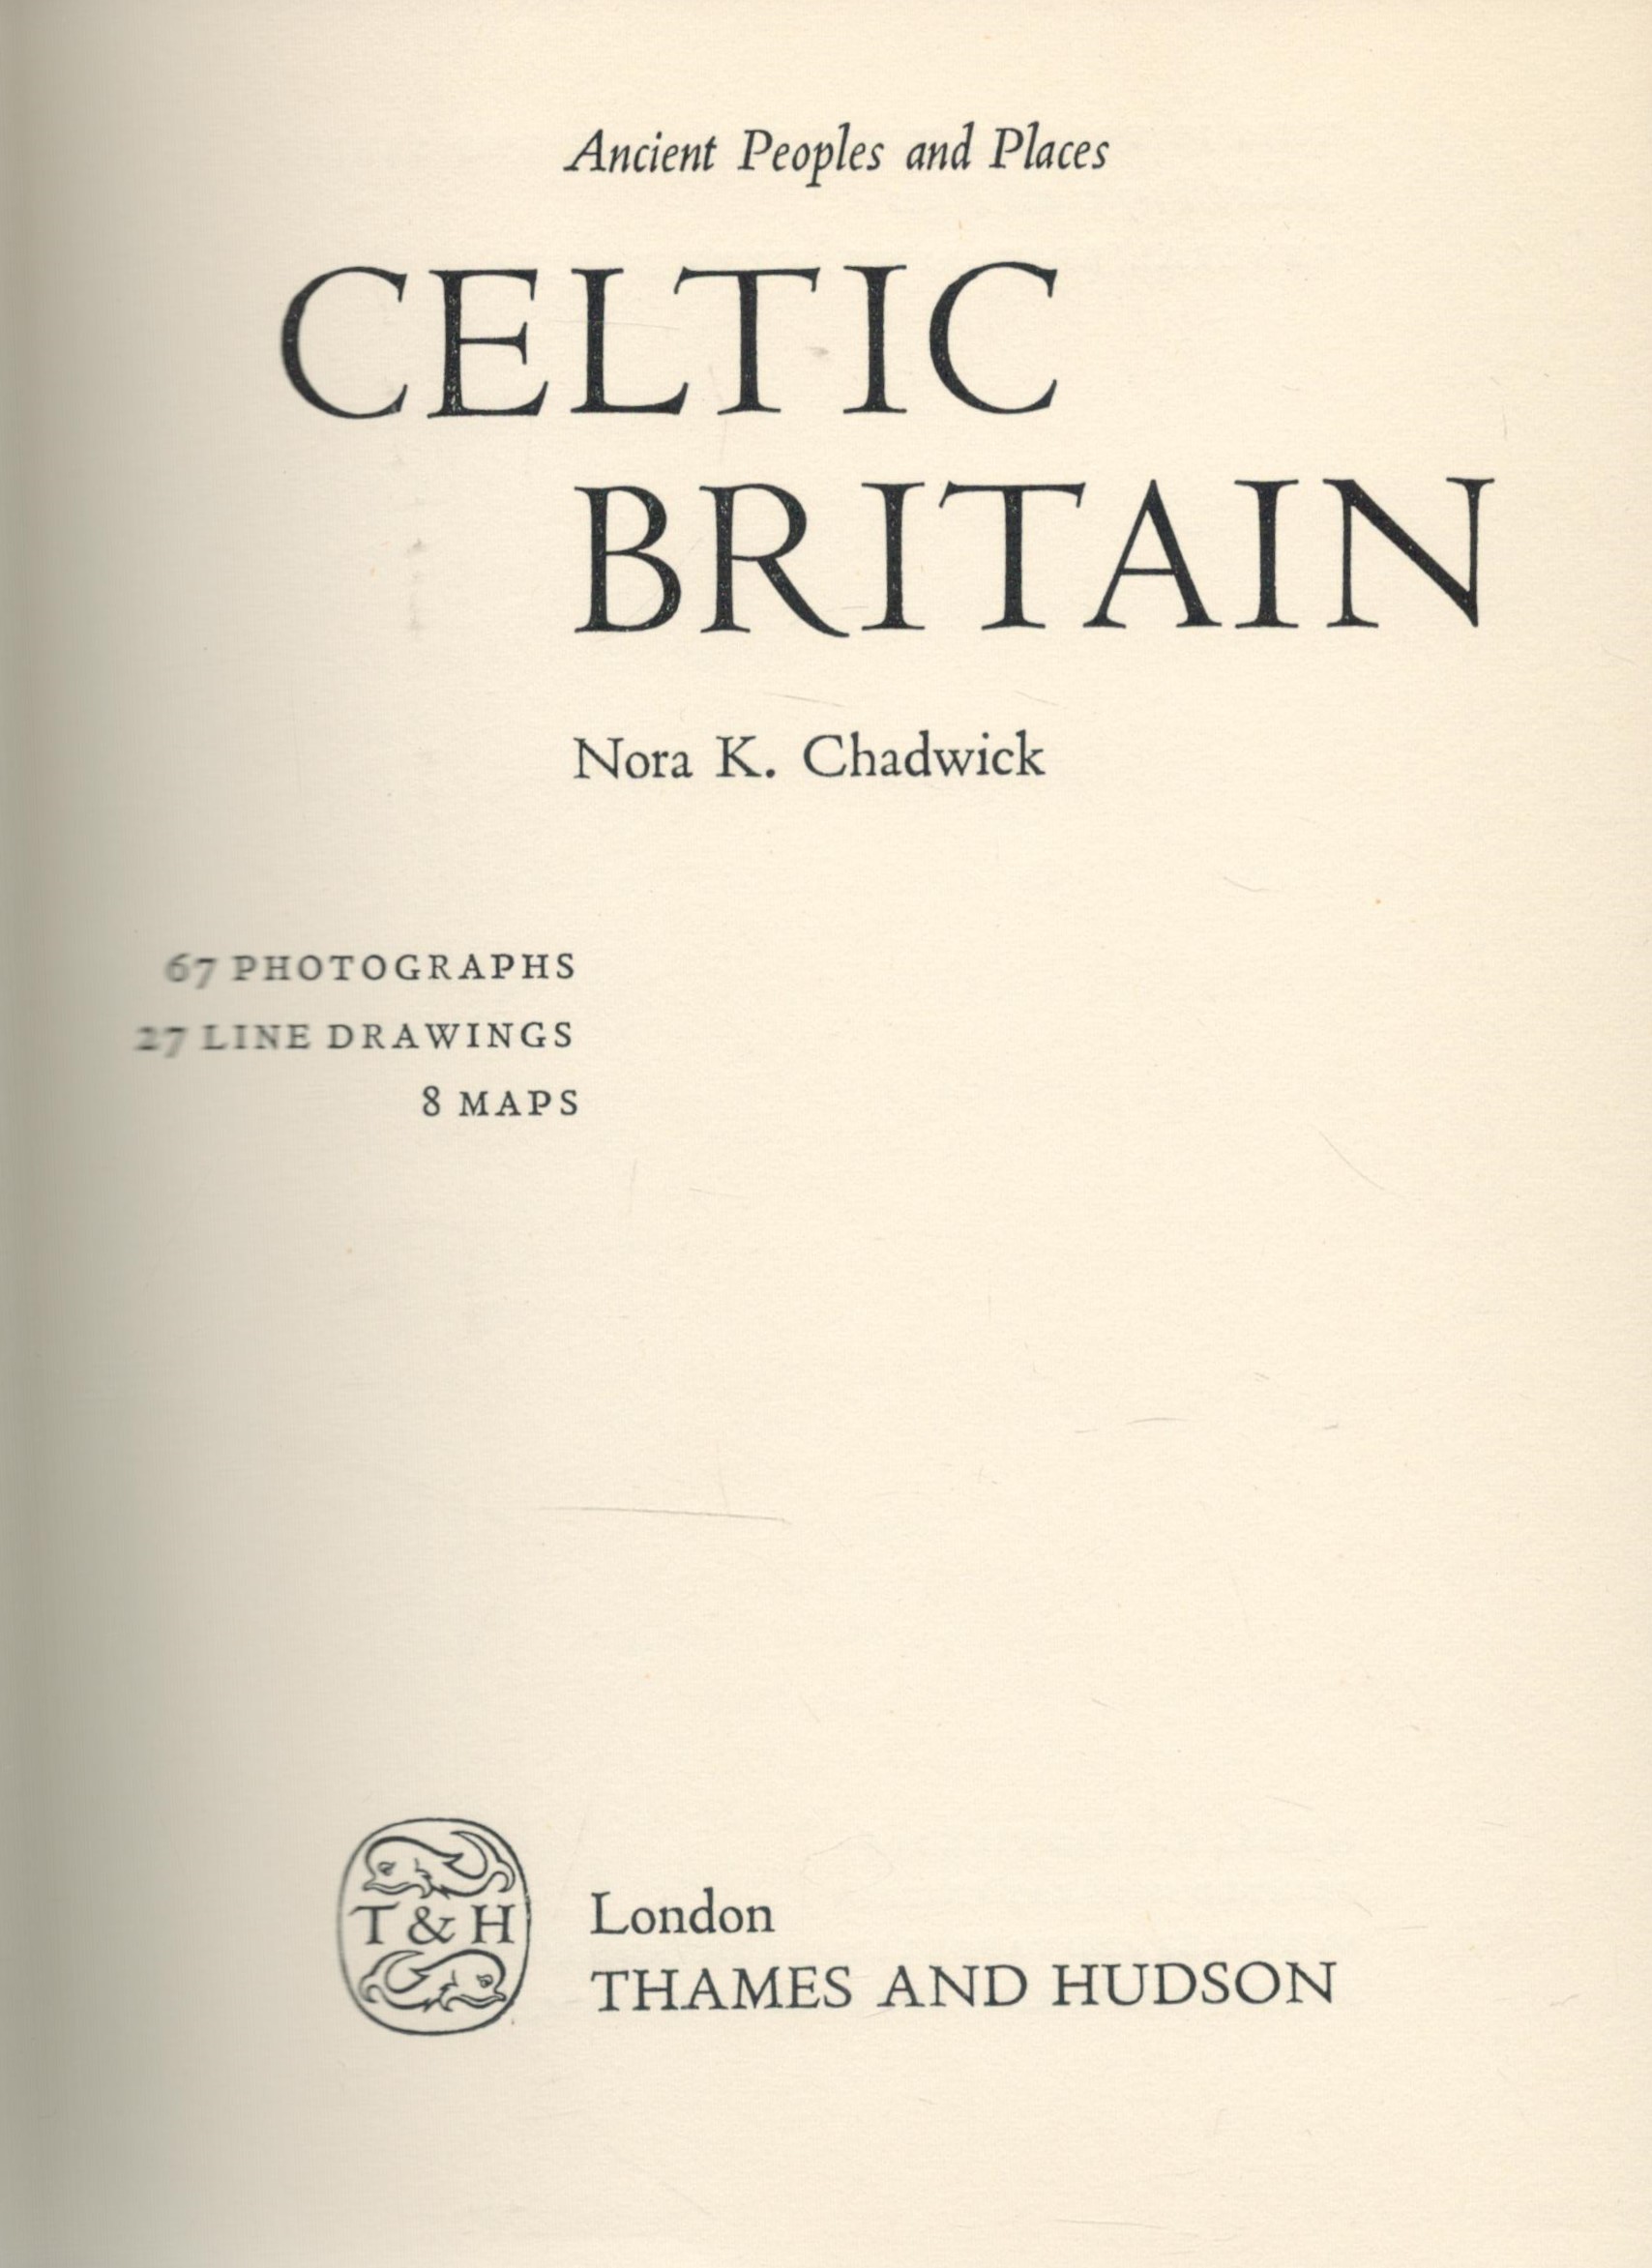 Celtic Britain by Nora K Chadwick 1963 First Edition Hardback Book with 238 pages published by - Image 2 of 3